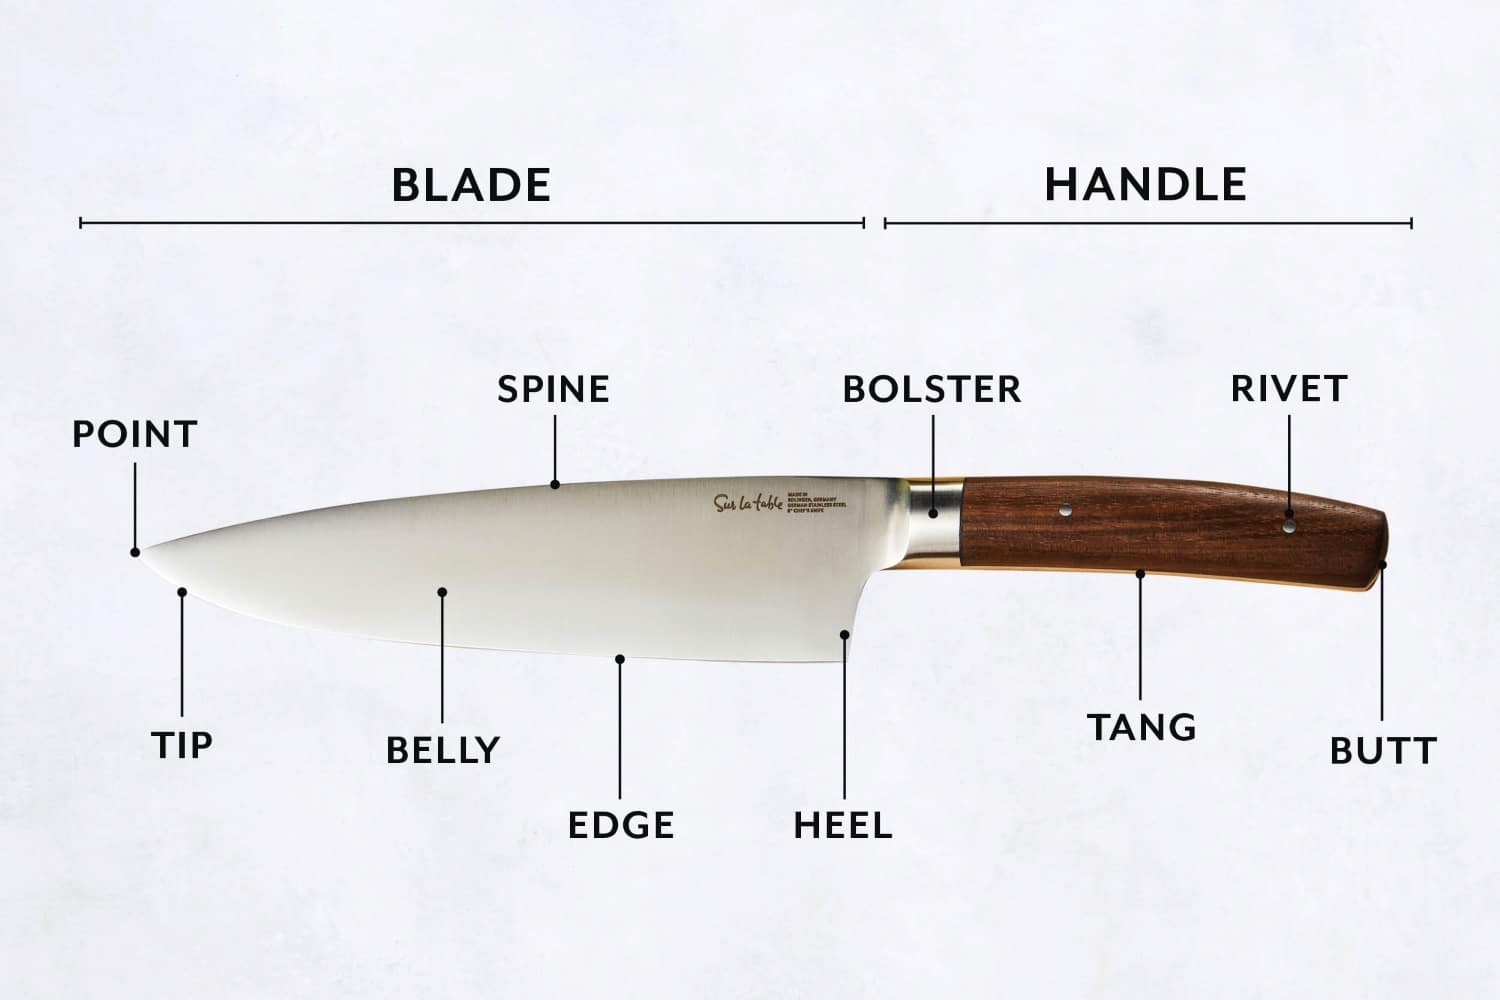 anatomy of a knife, parts of a knife, knife anatomy, how are knives made, knife anatomy infographic